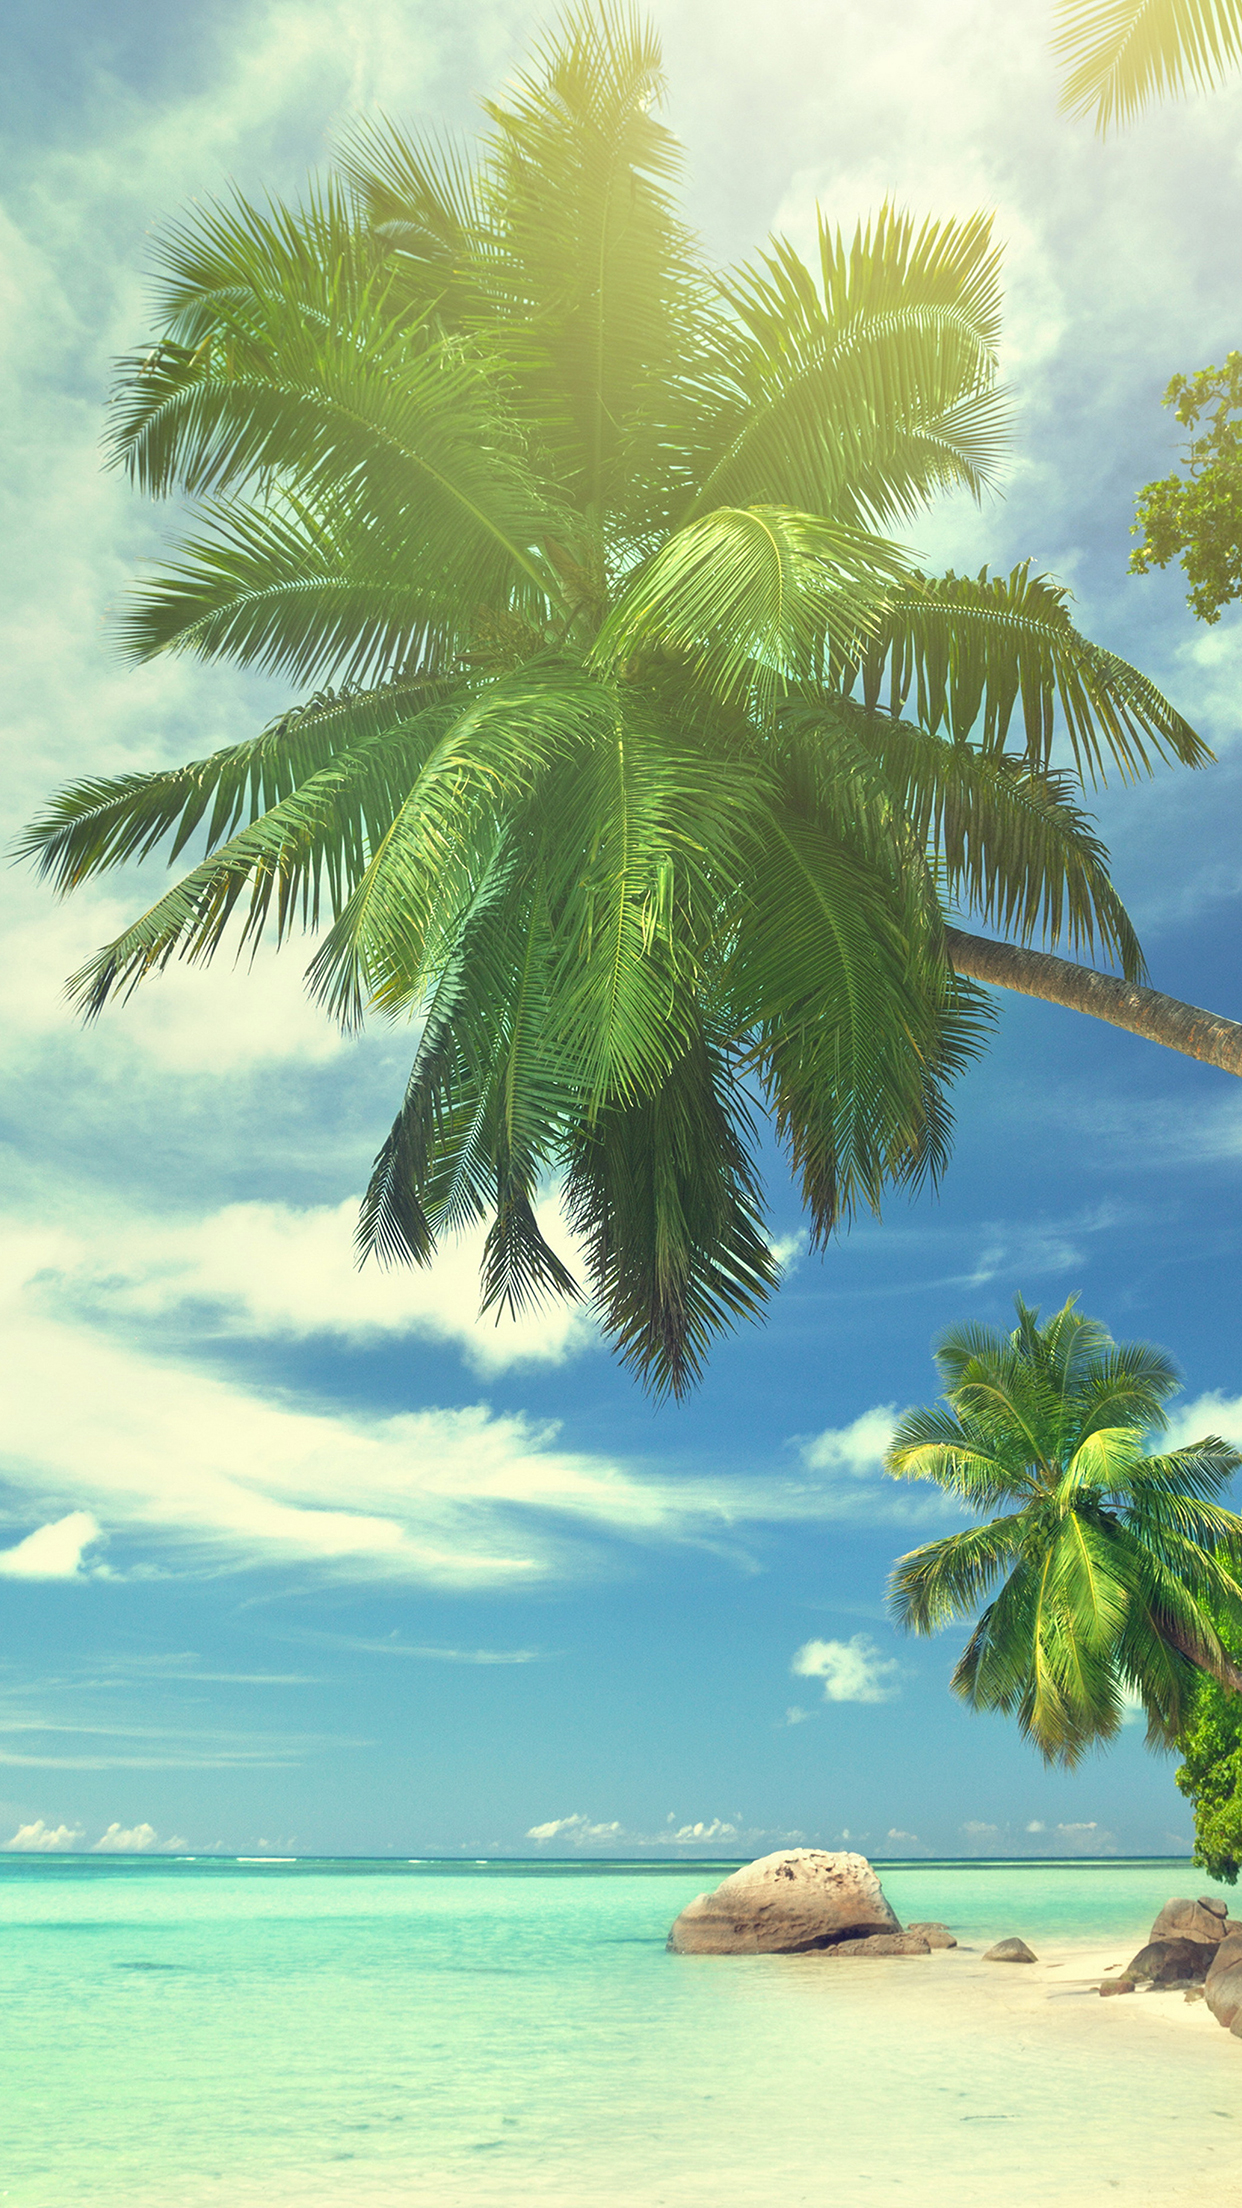 Summer Tropical Paradise Wallpaper for iPhone Pro Max, X, 6